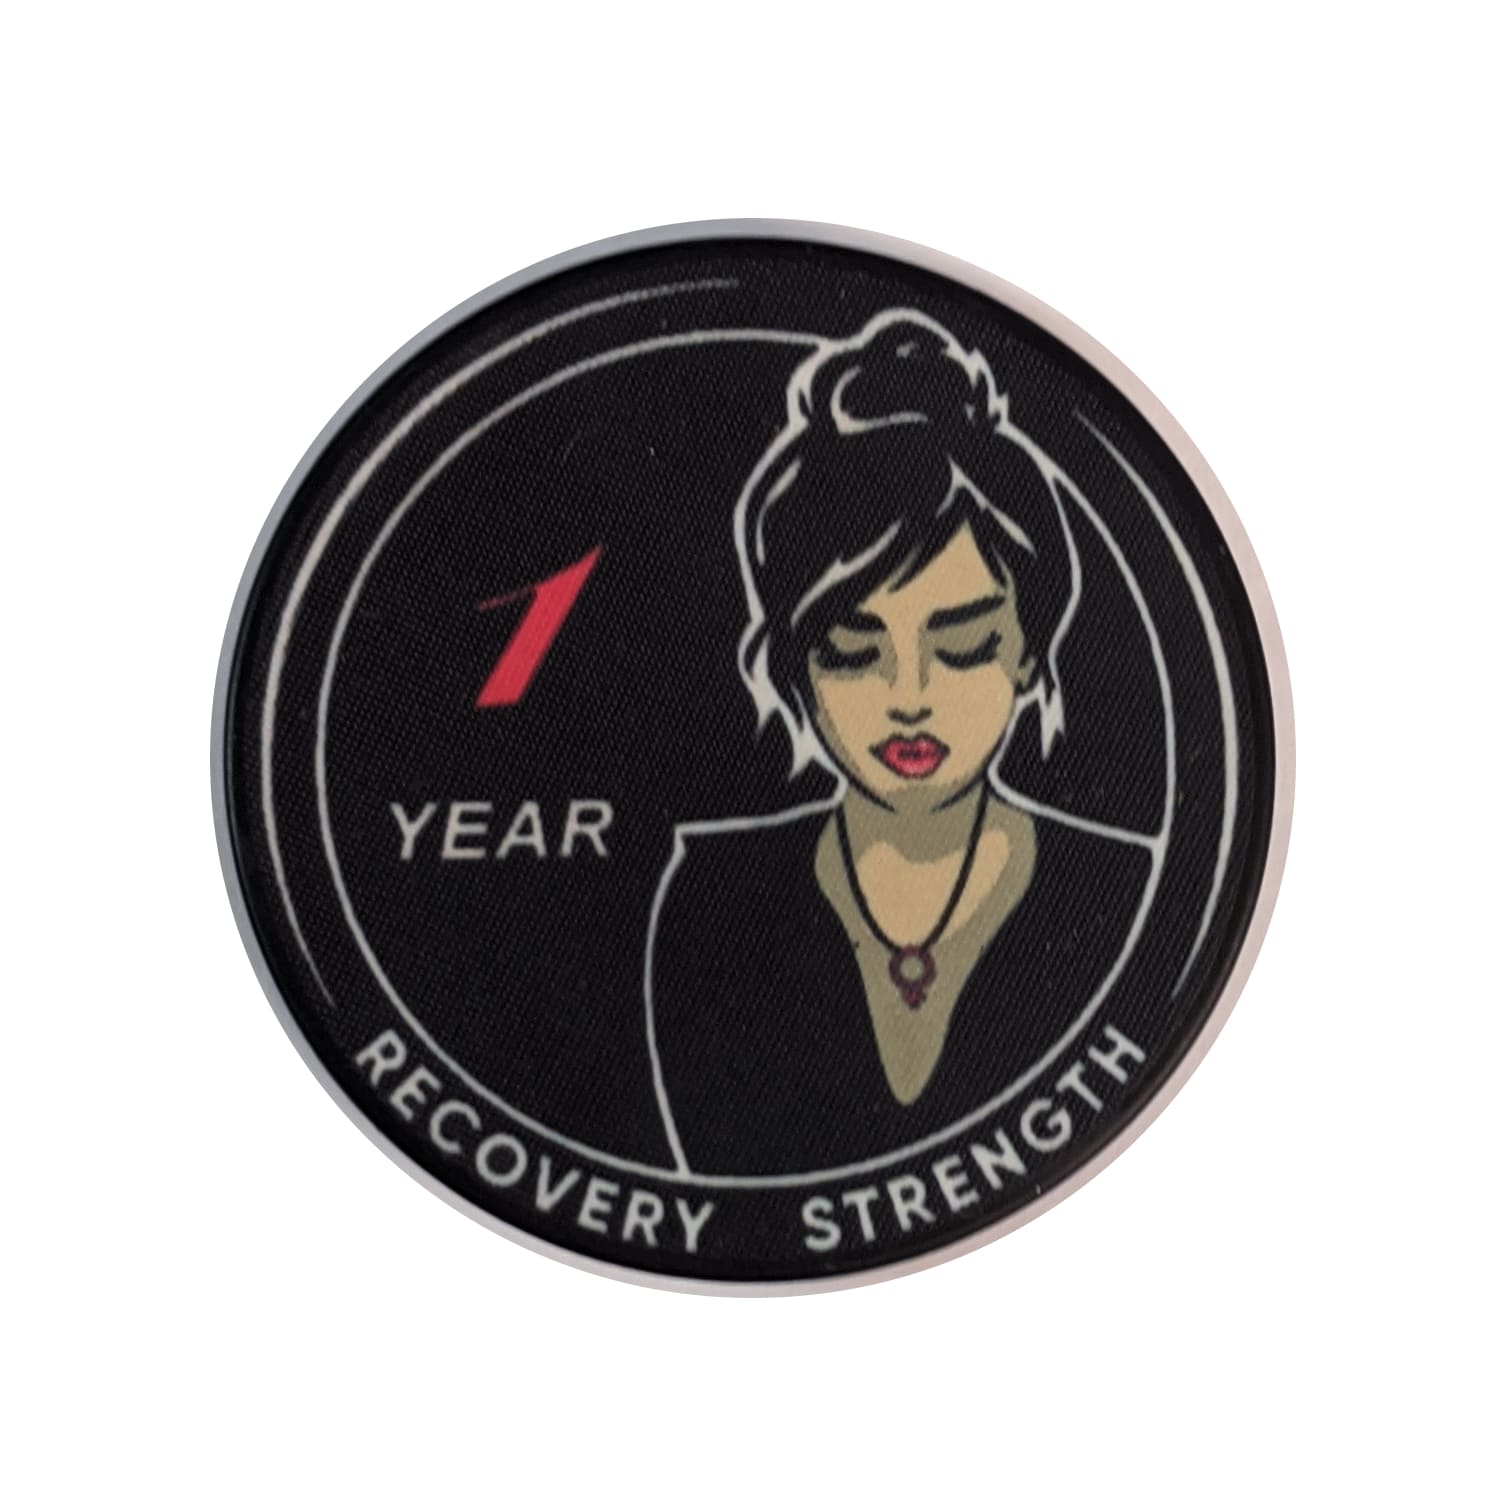 Woman Serenity Yearly